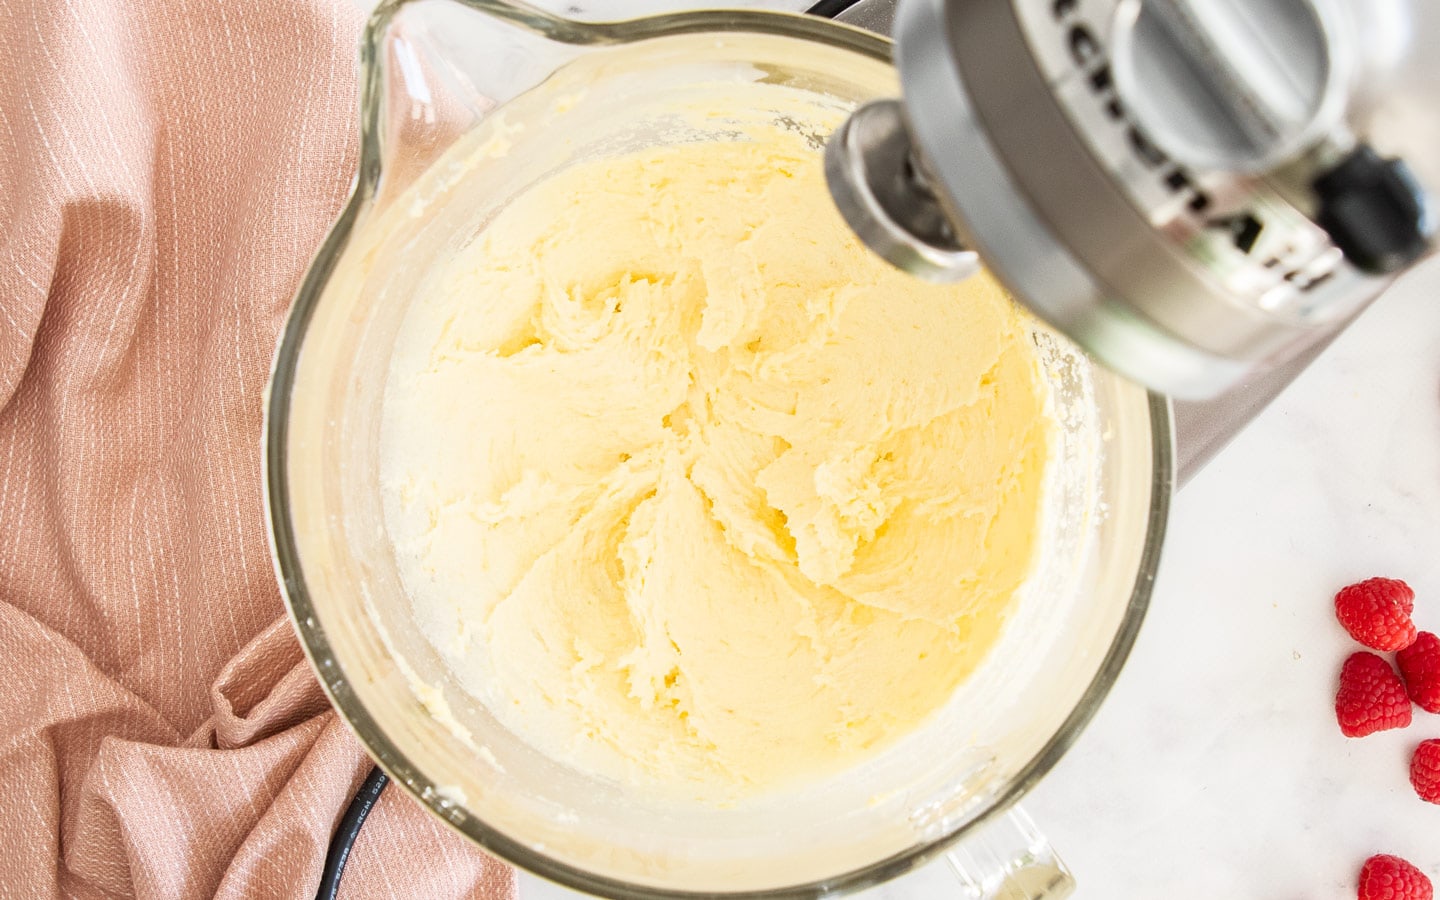 The creamed butter and sugar in the bowl of as stand mixer.